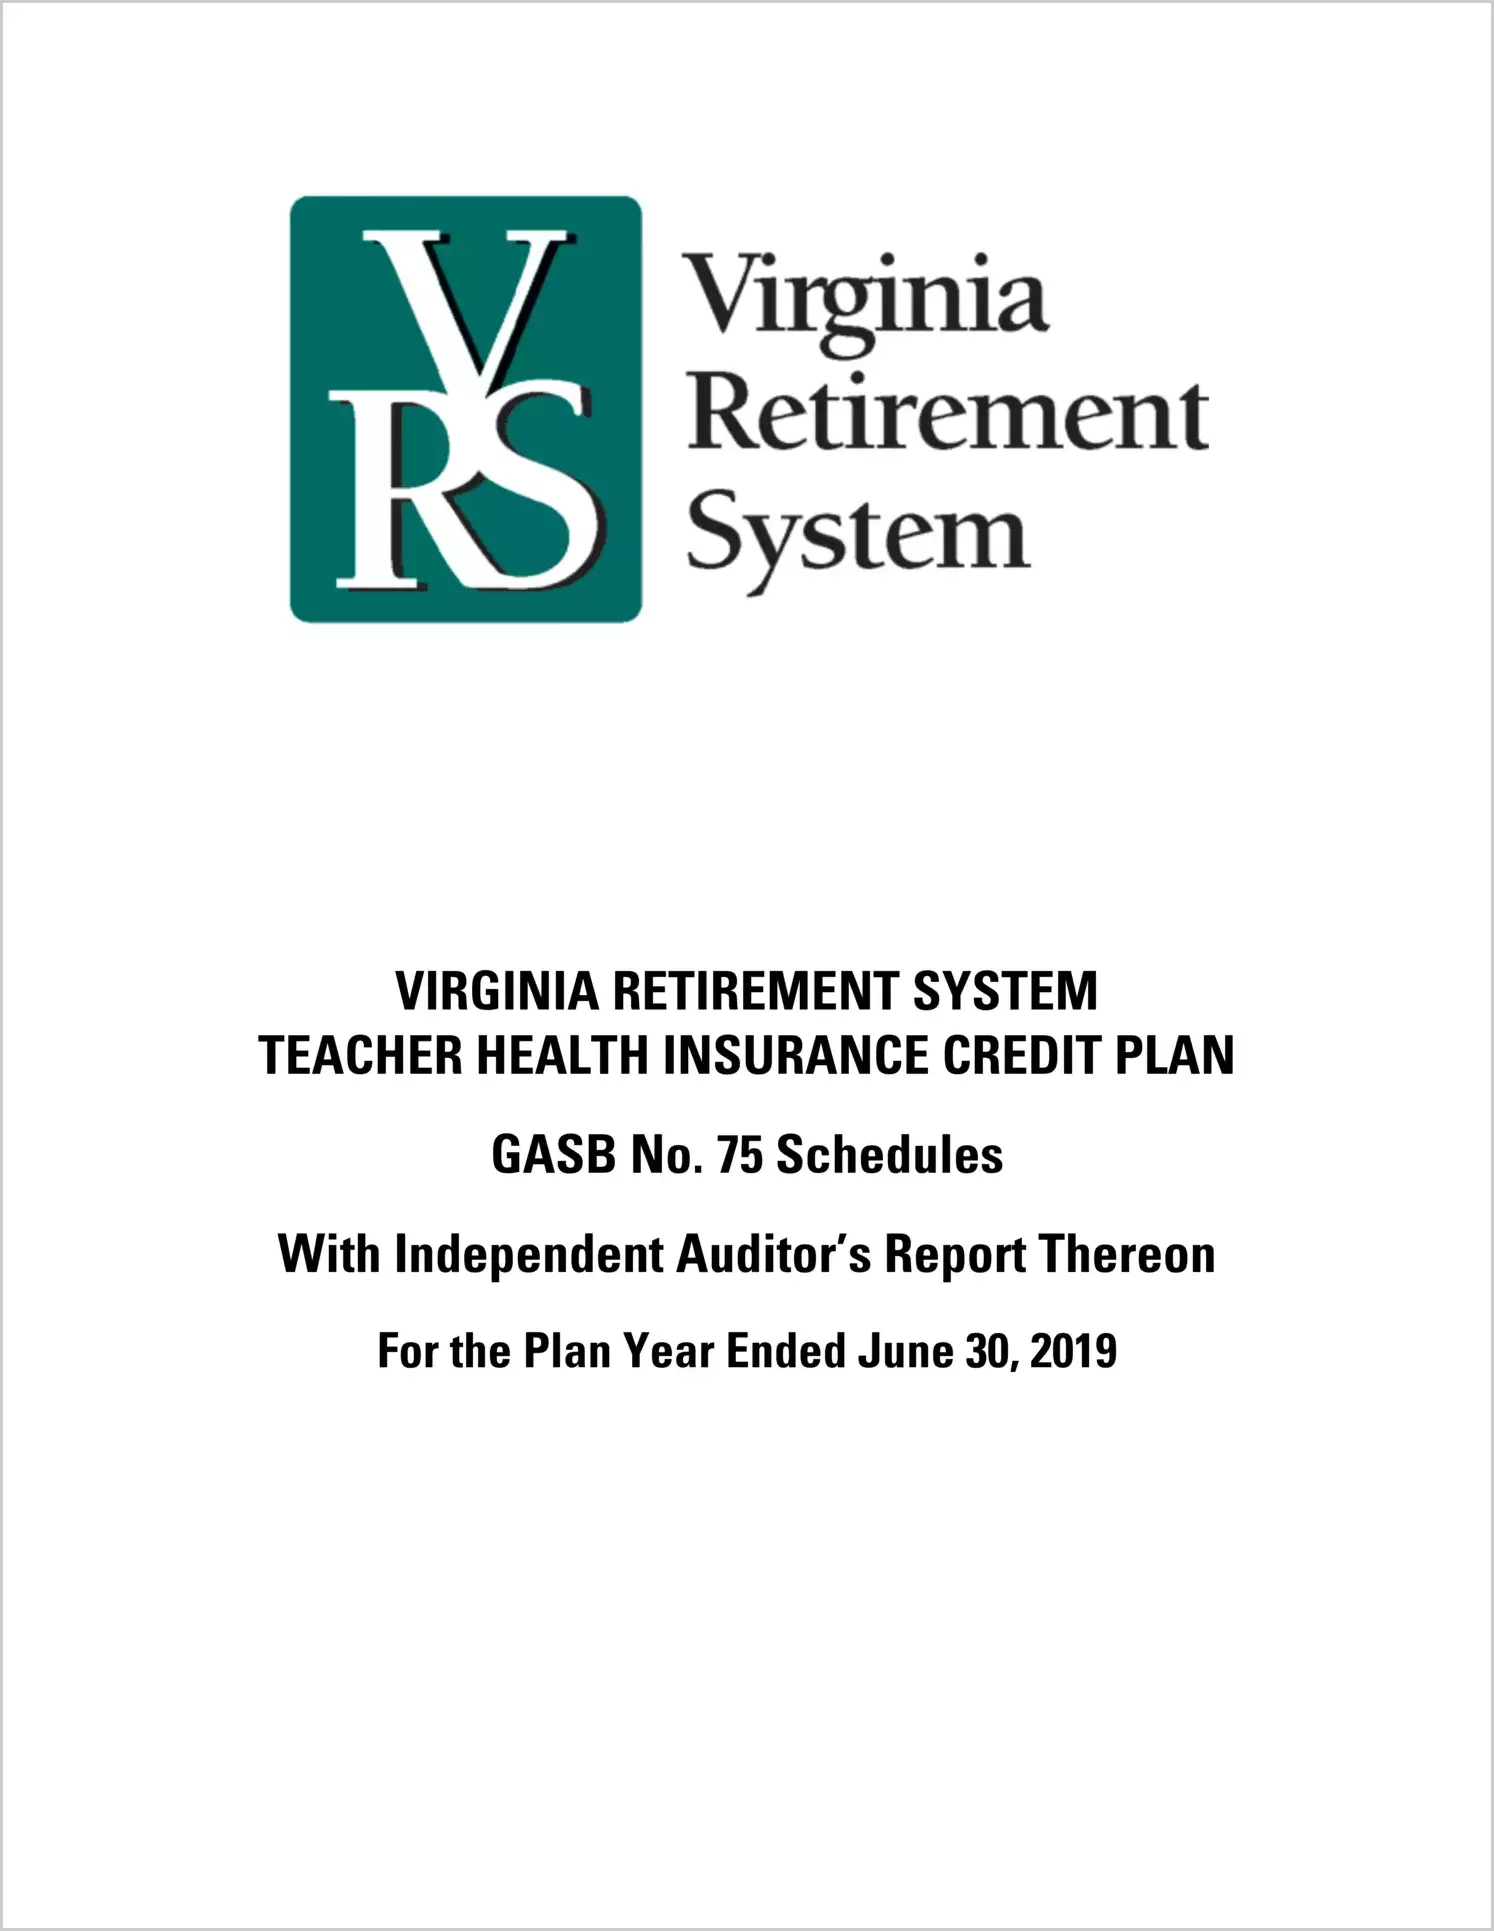 GASB 75 Schedule - Virginia Retirement System Teacher Health Insurance Credit Plan for the plan year ended June 30, 2019